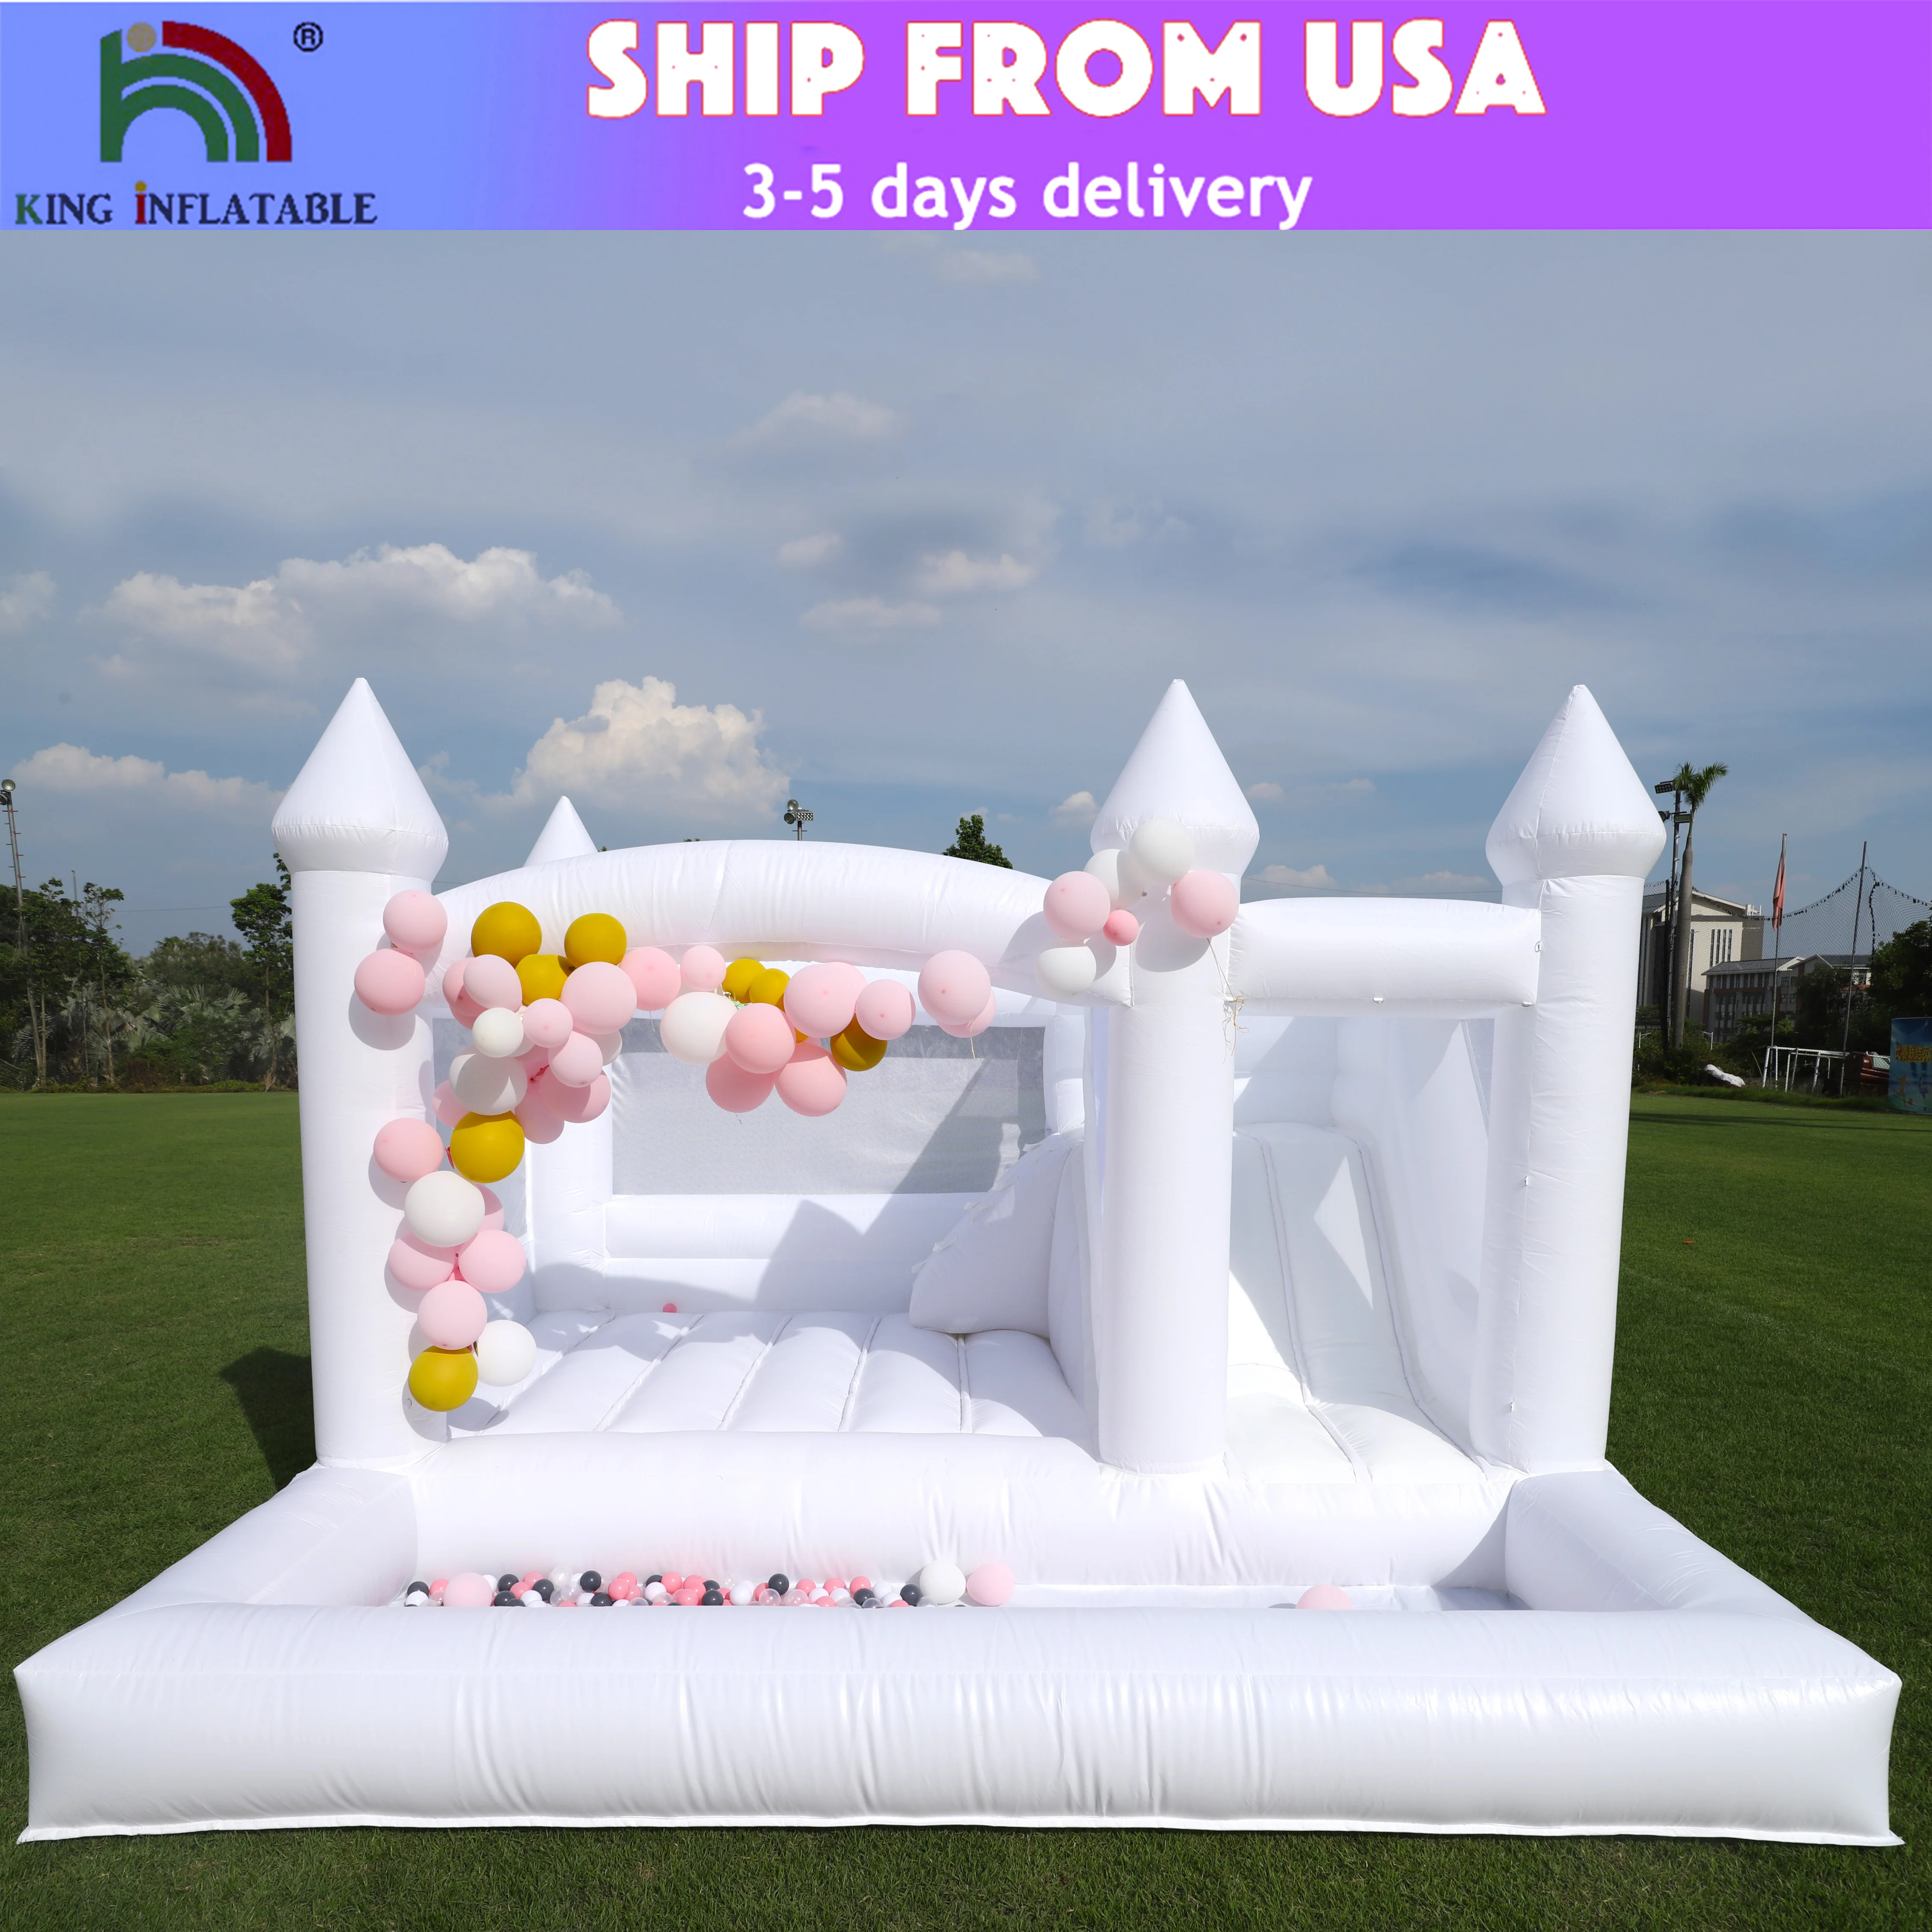 

15ft Commercial Inflatable White Bounce House Water Slide With Ball Pit For Party Rent Kids Jumping Bouncy Castle Bouncer Blower